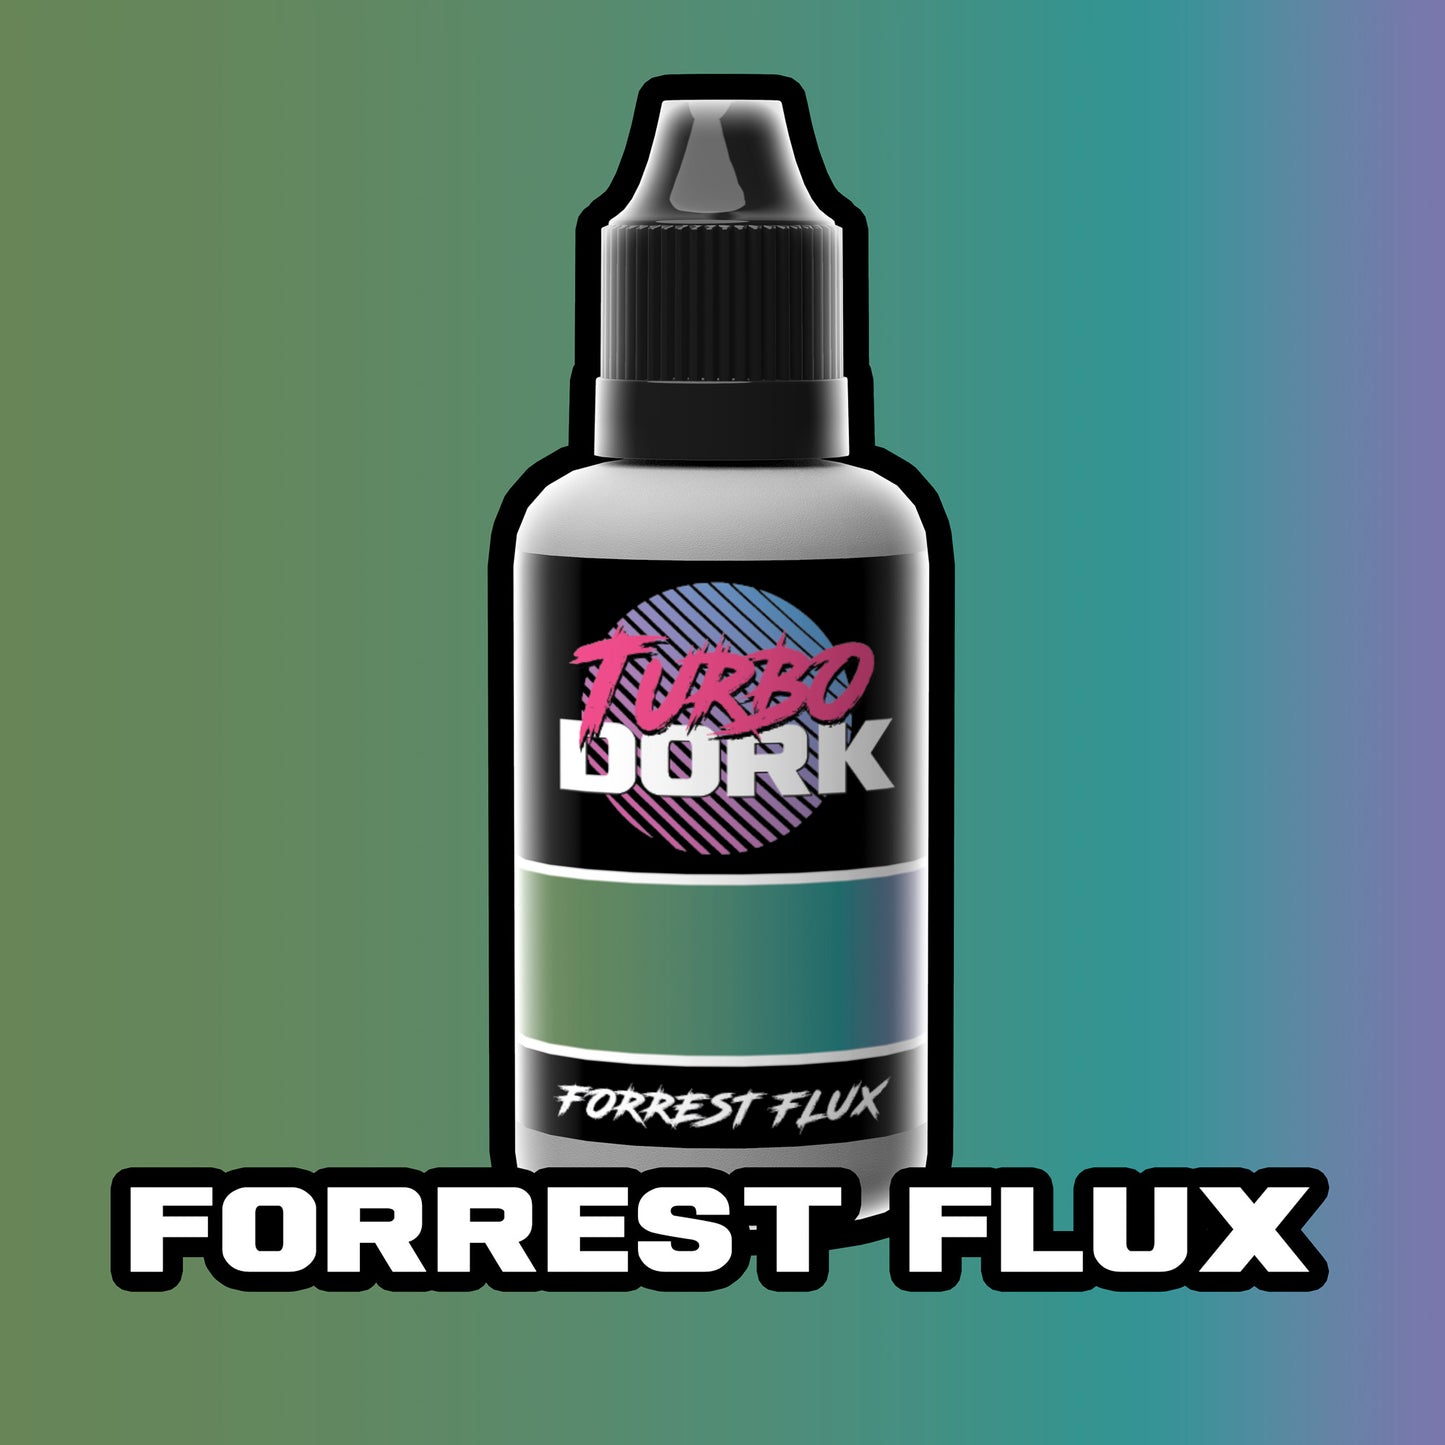 bottle of green, turquoise, and purple turboshift paint (Forrest Flux)